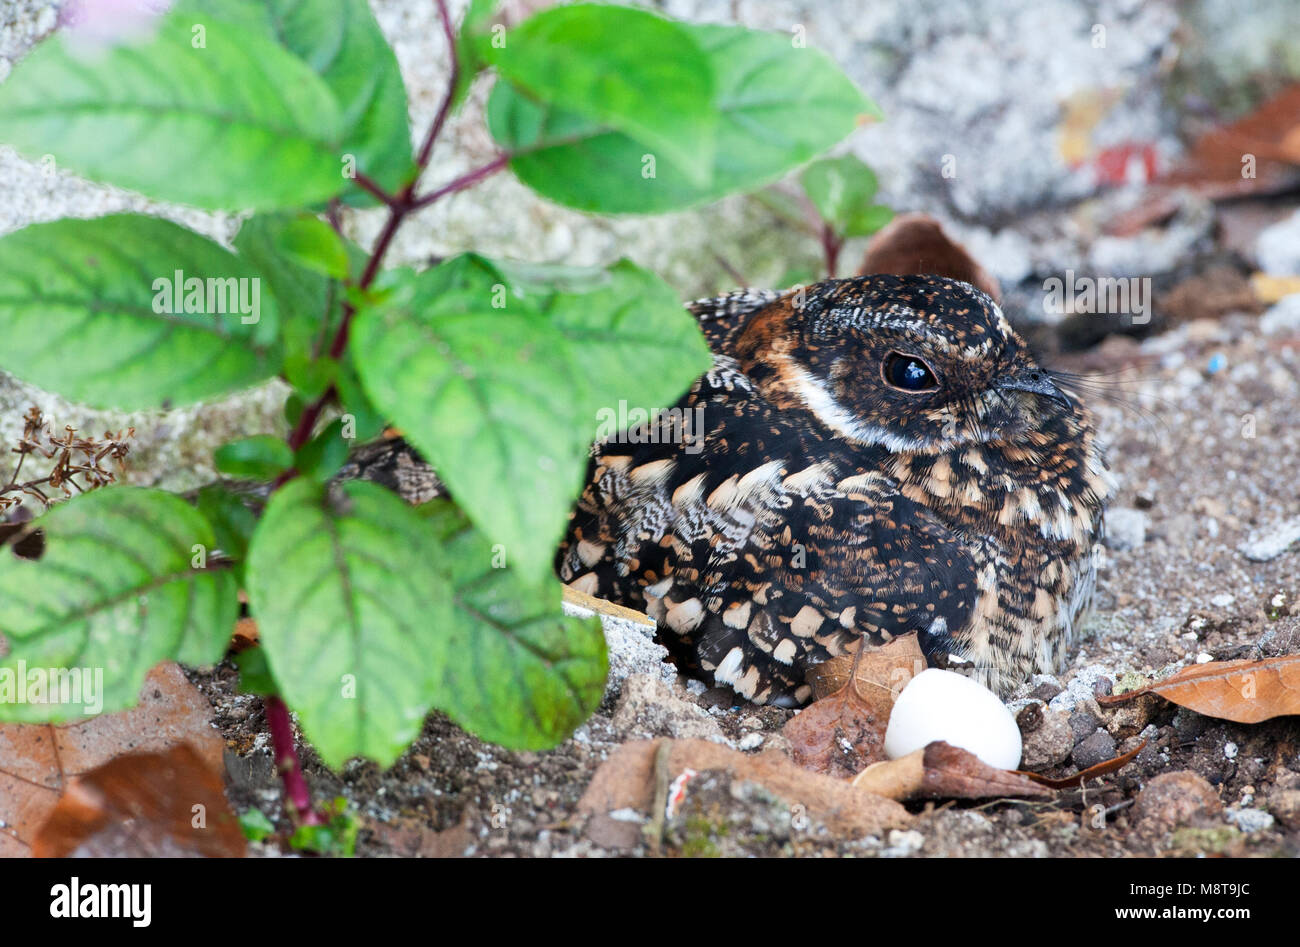 Vleugelbandnachtzwaluw zittend op zijn nest; Band-winged Nightjar perched on its nest in Rio Blanco, Colombia Stock Photo